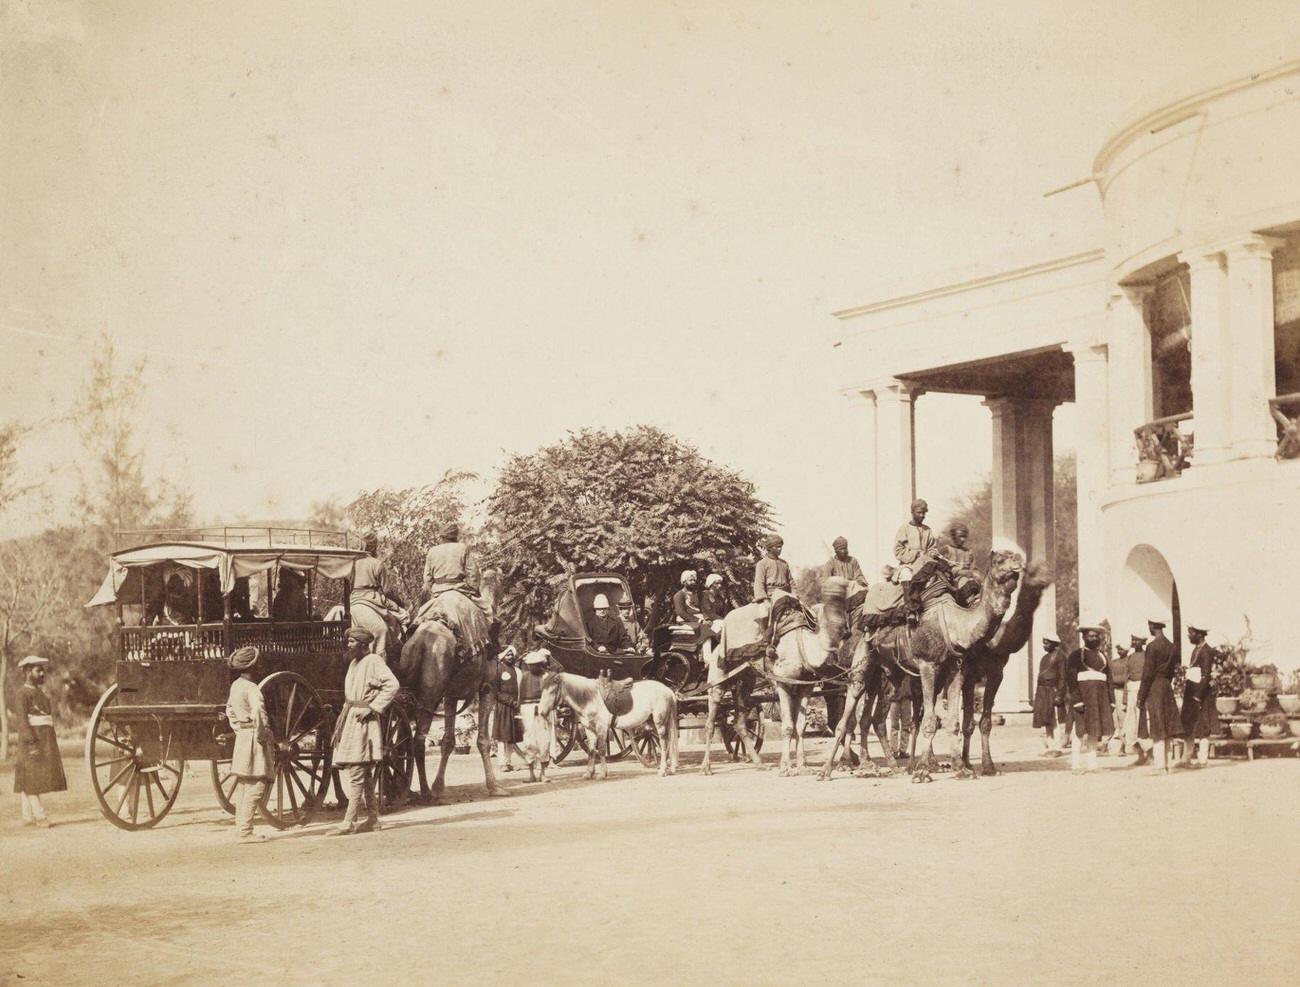 The Lieutenant Governor of the Punjab with camel carriages, India, circa 1865.